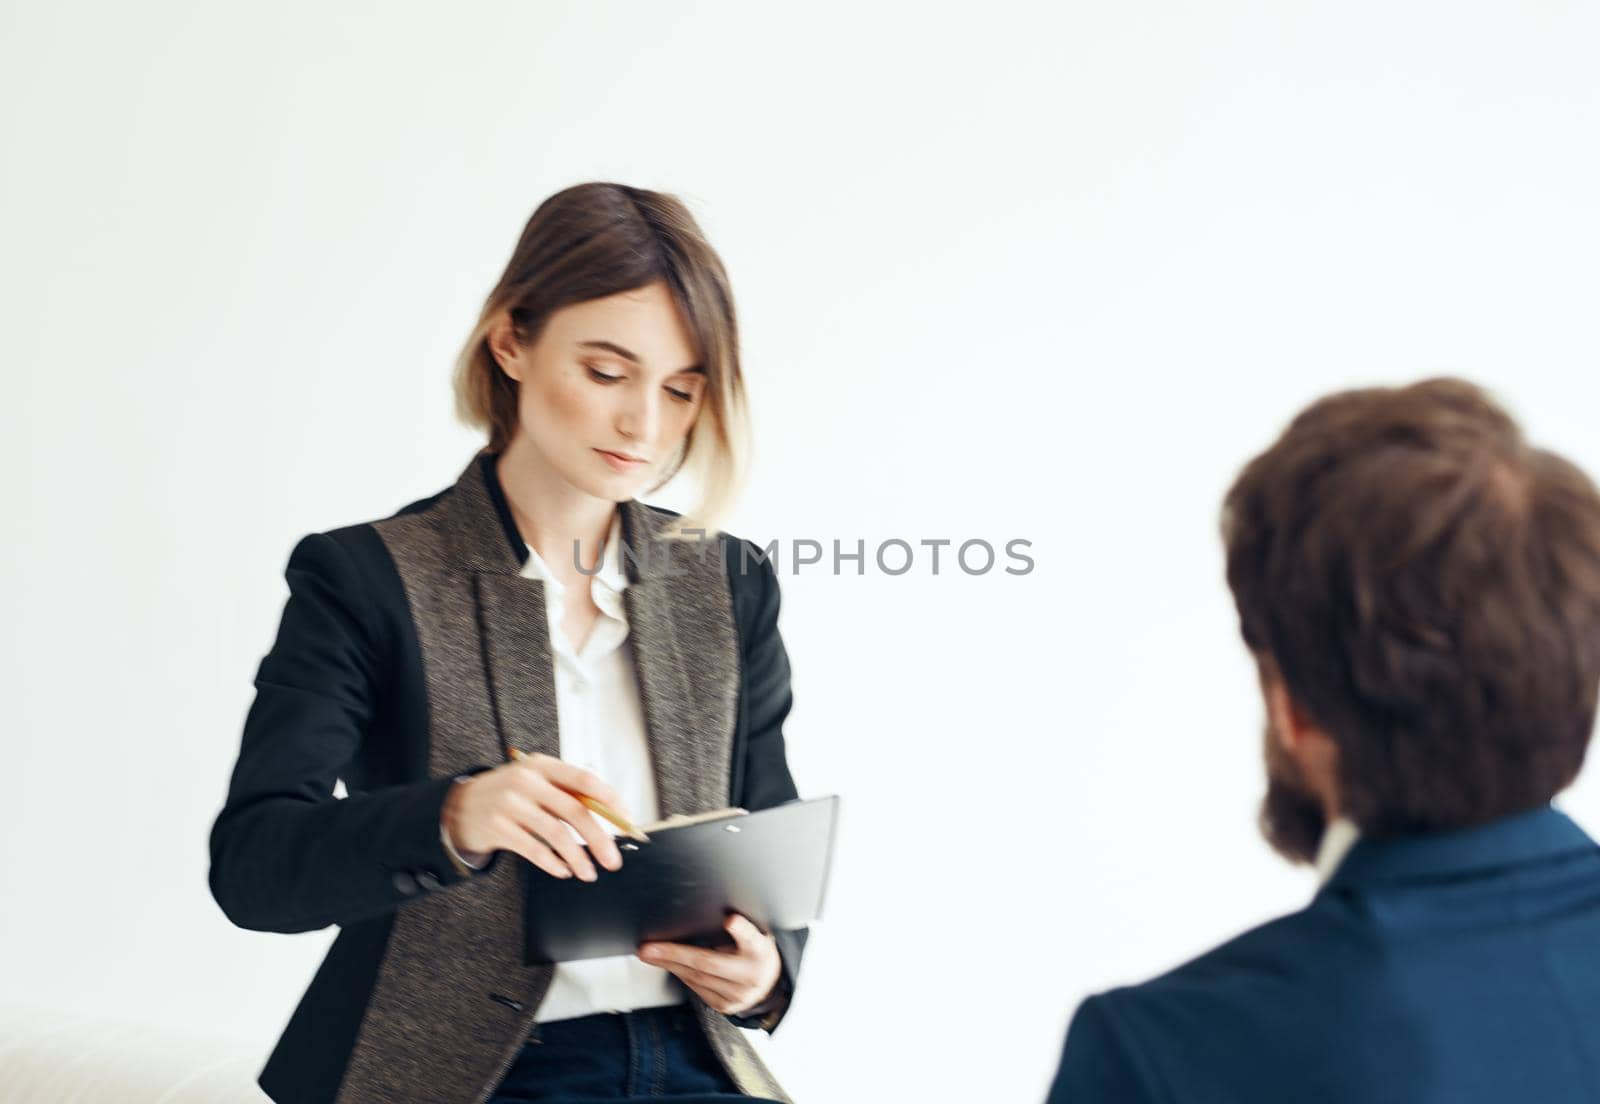 A man for an interview In a bright room talking to a woman opposite by SHOTPRIME